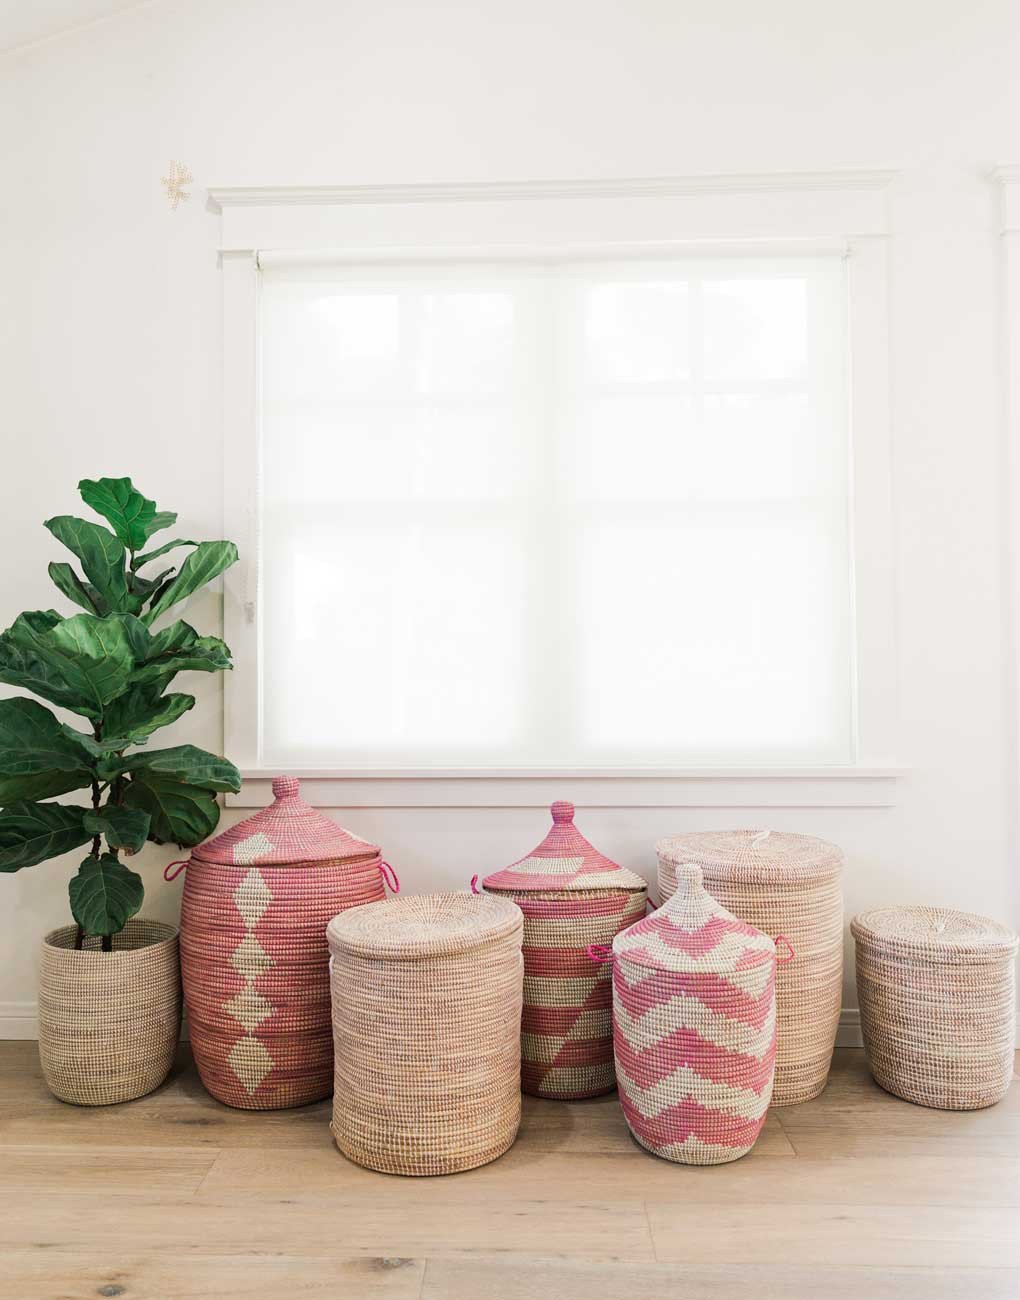 How to Turn a Storage Basket into a Chic Focal Point